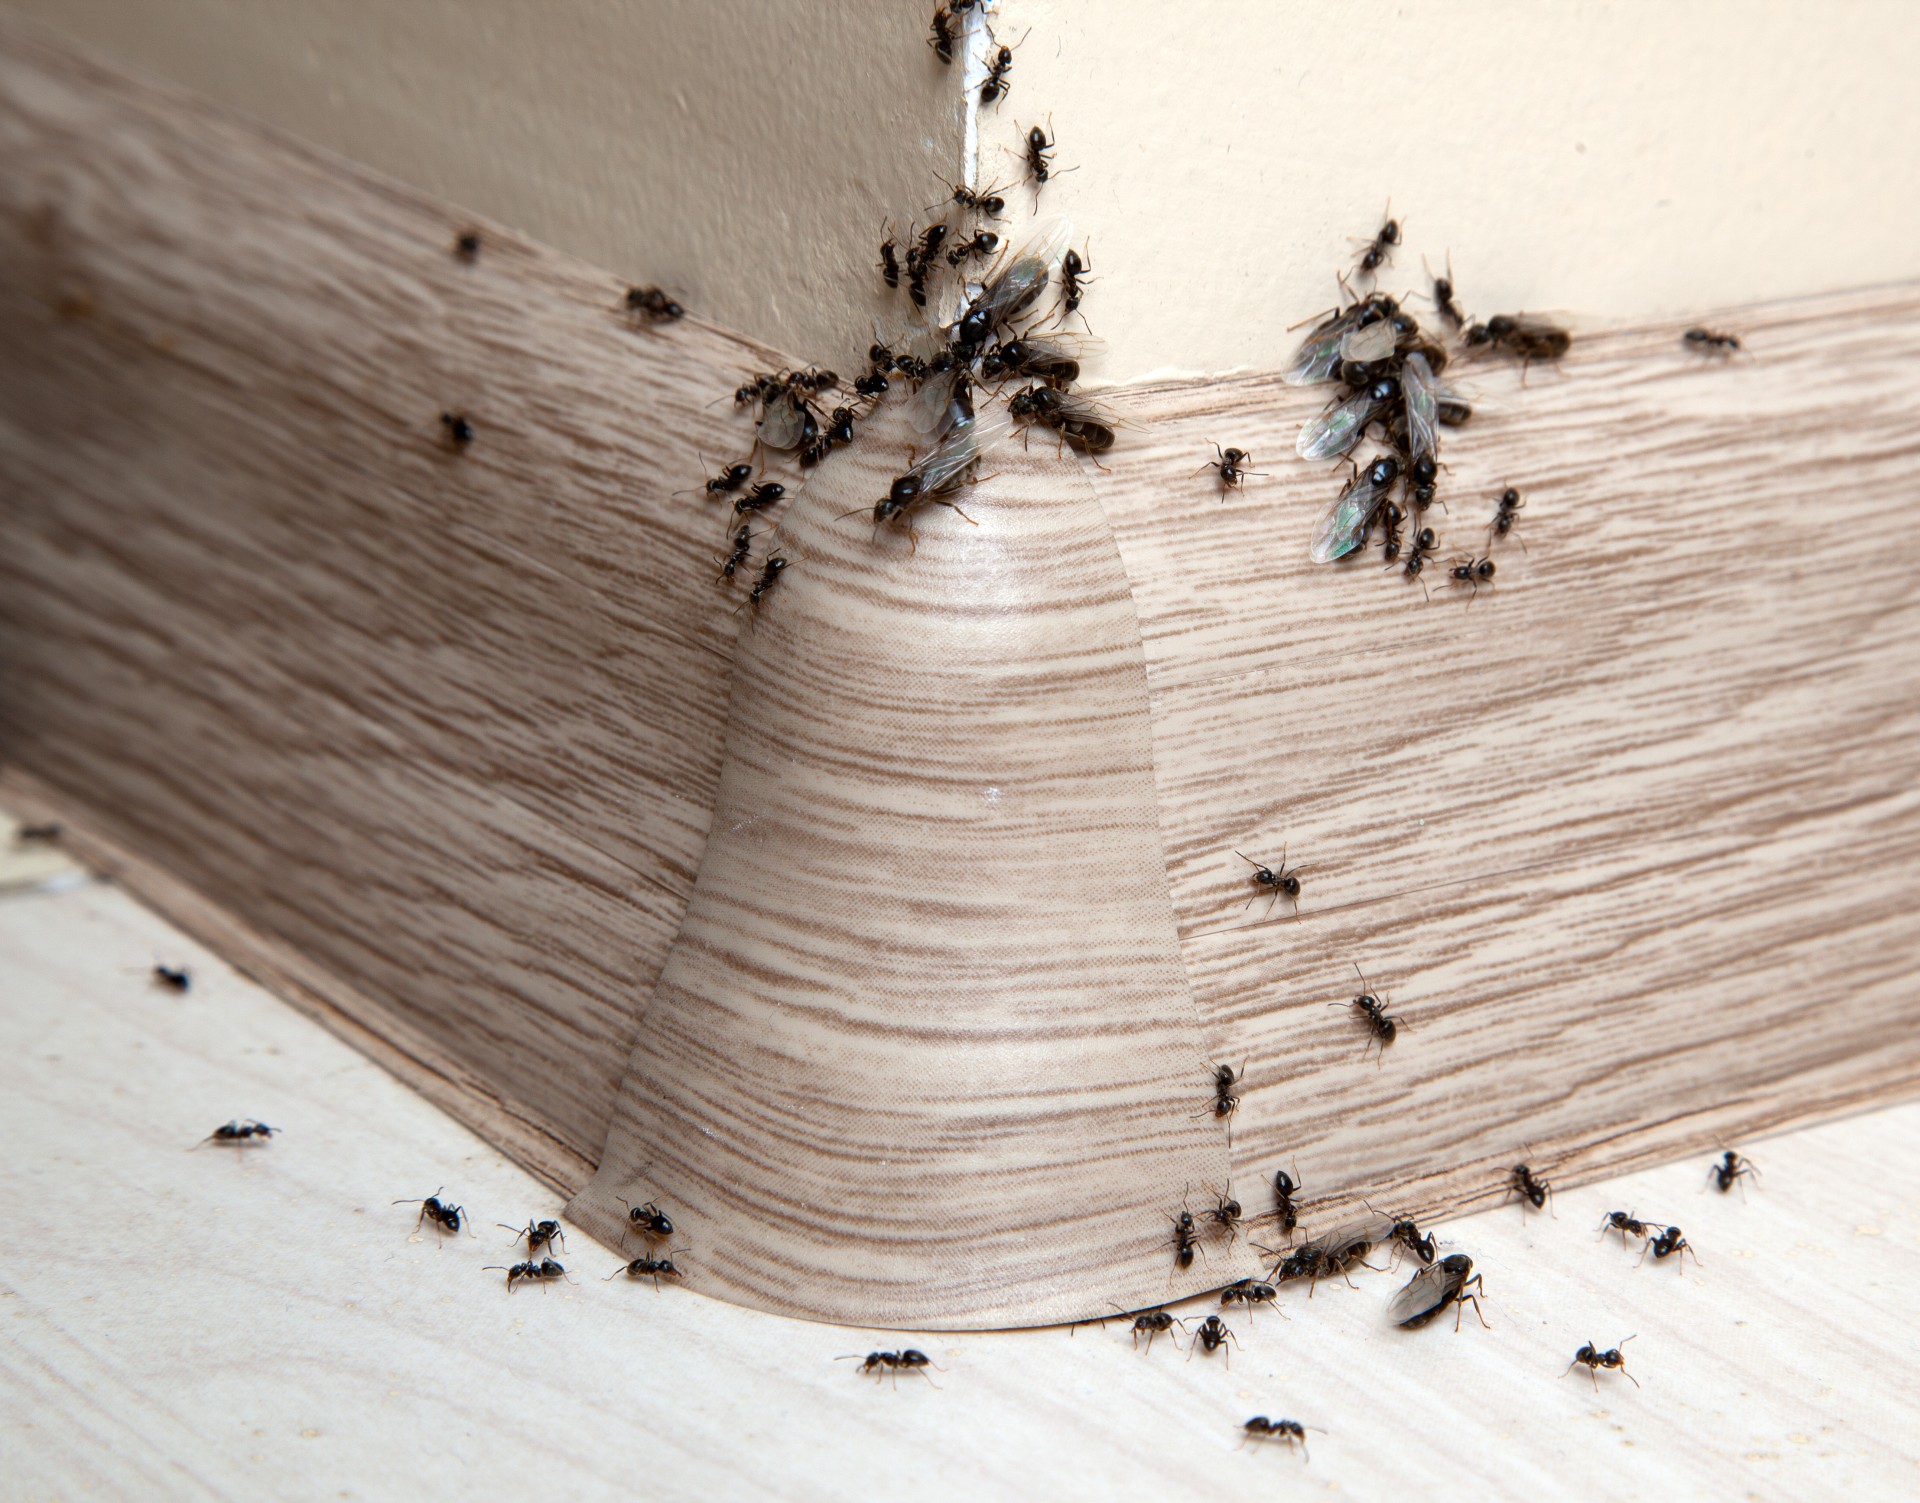 Ant Infestation, Pest Control in Brent Cross, Hendon, NW4. Call Now 020 8166 9746